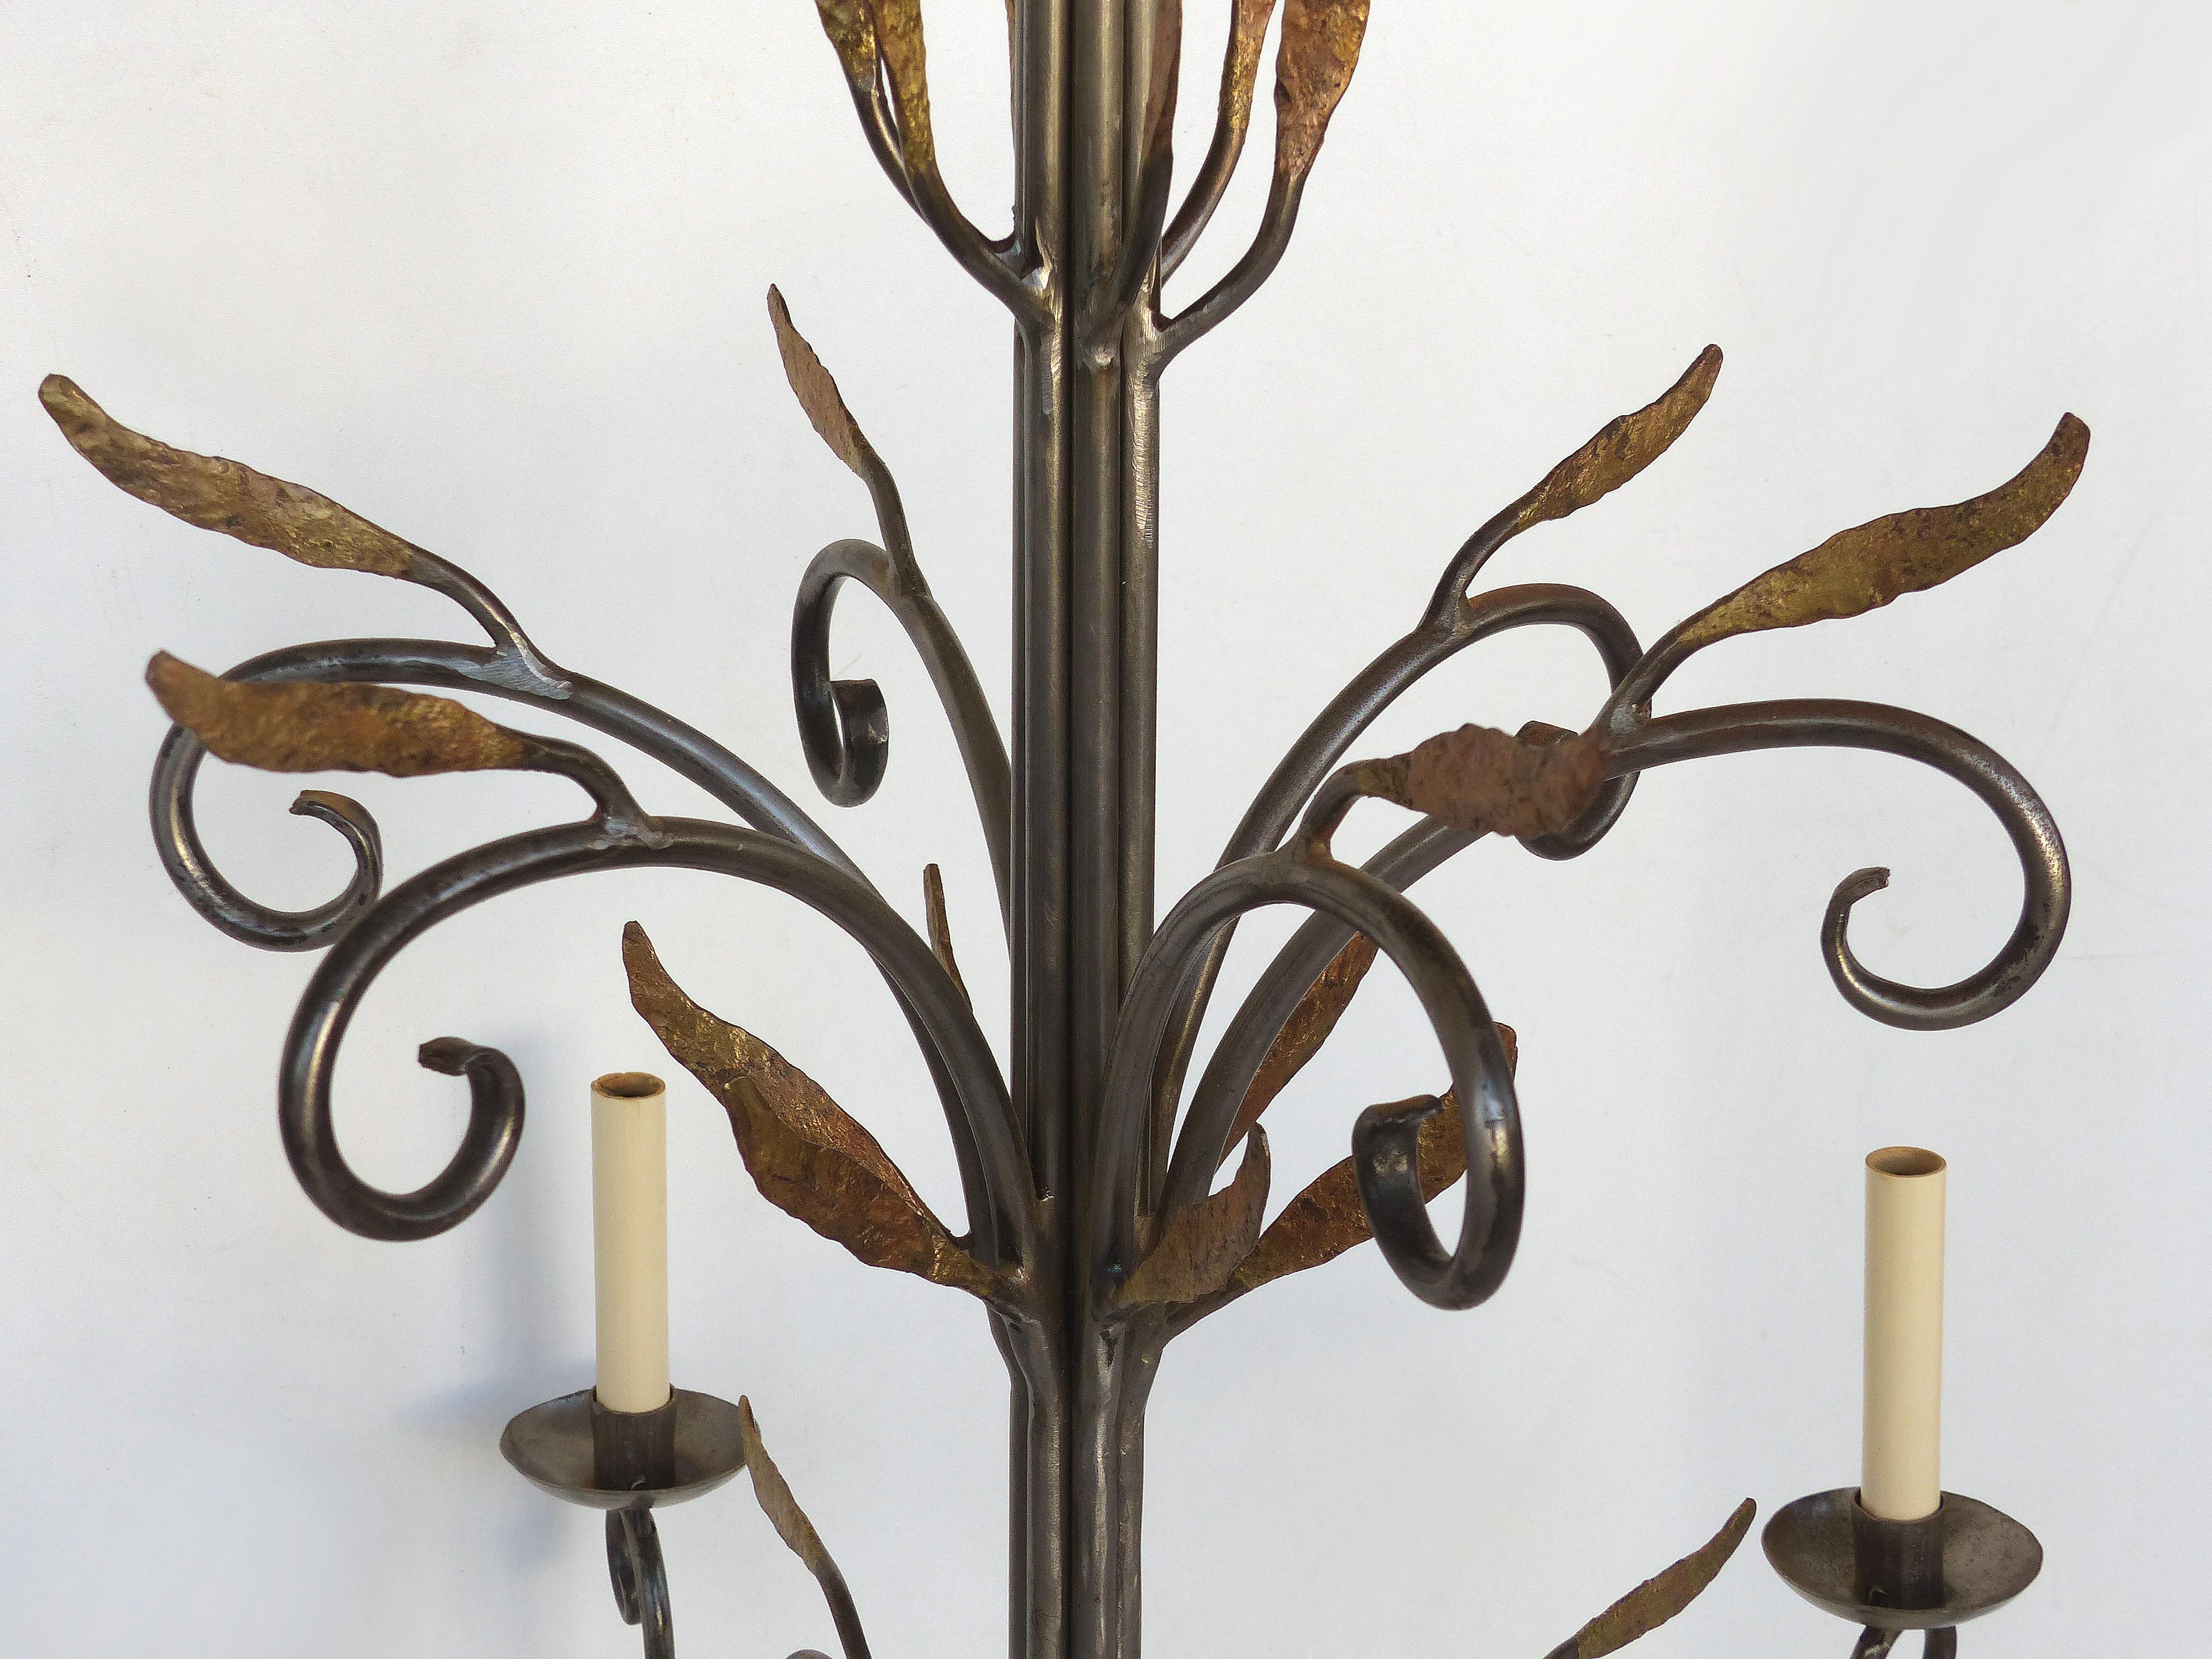 20th Century Handwrought Steel, Brass Chandelier by Metalworker in the Hamptons, NY For Sale